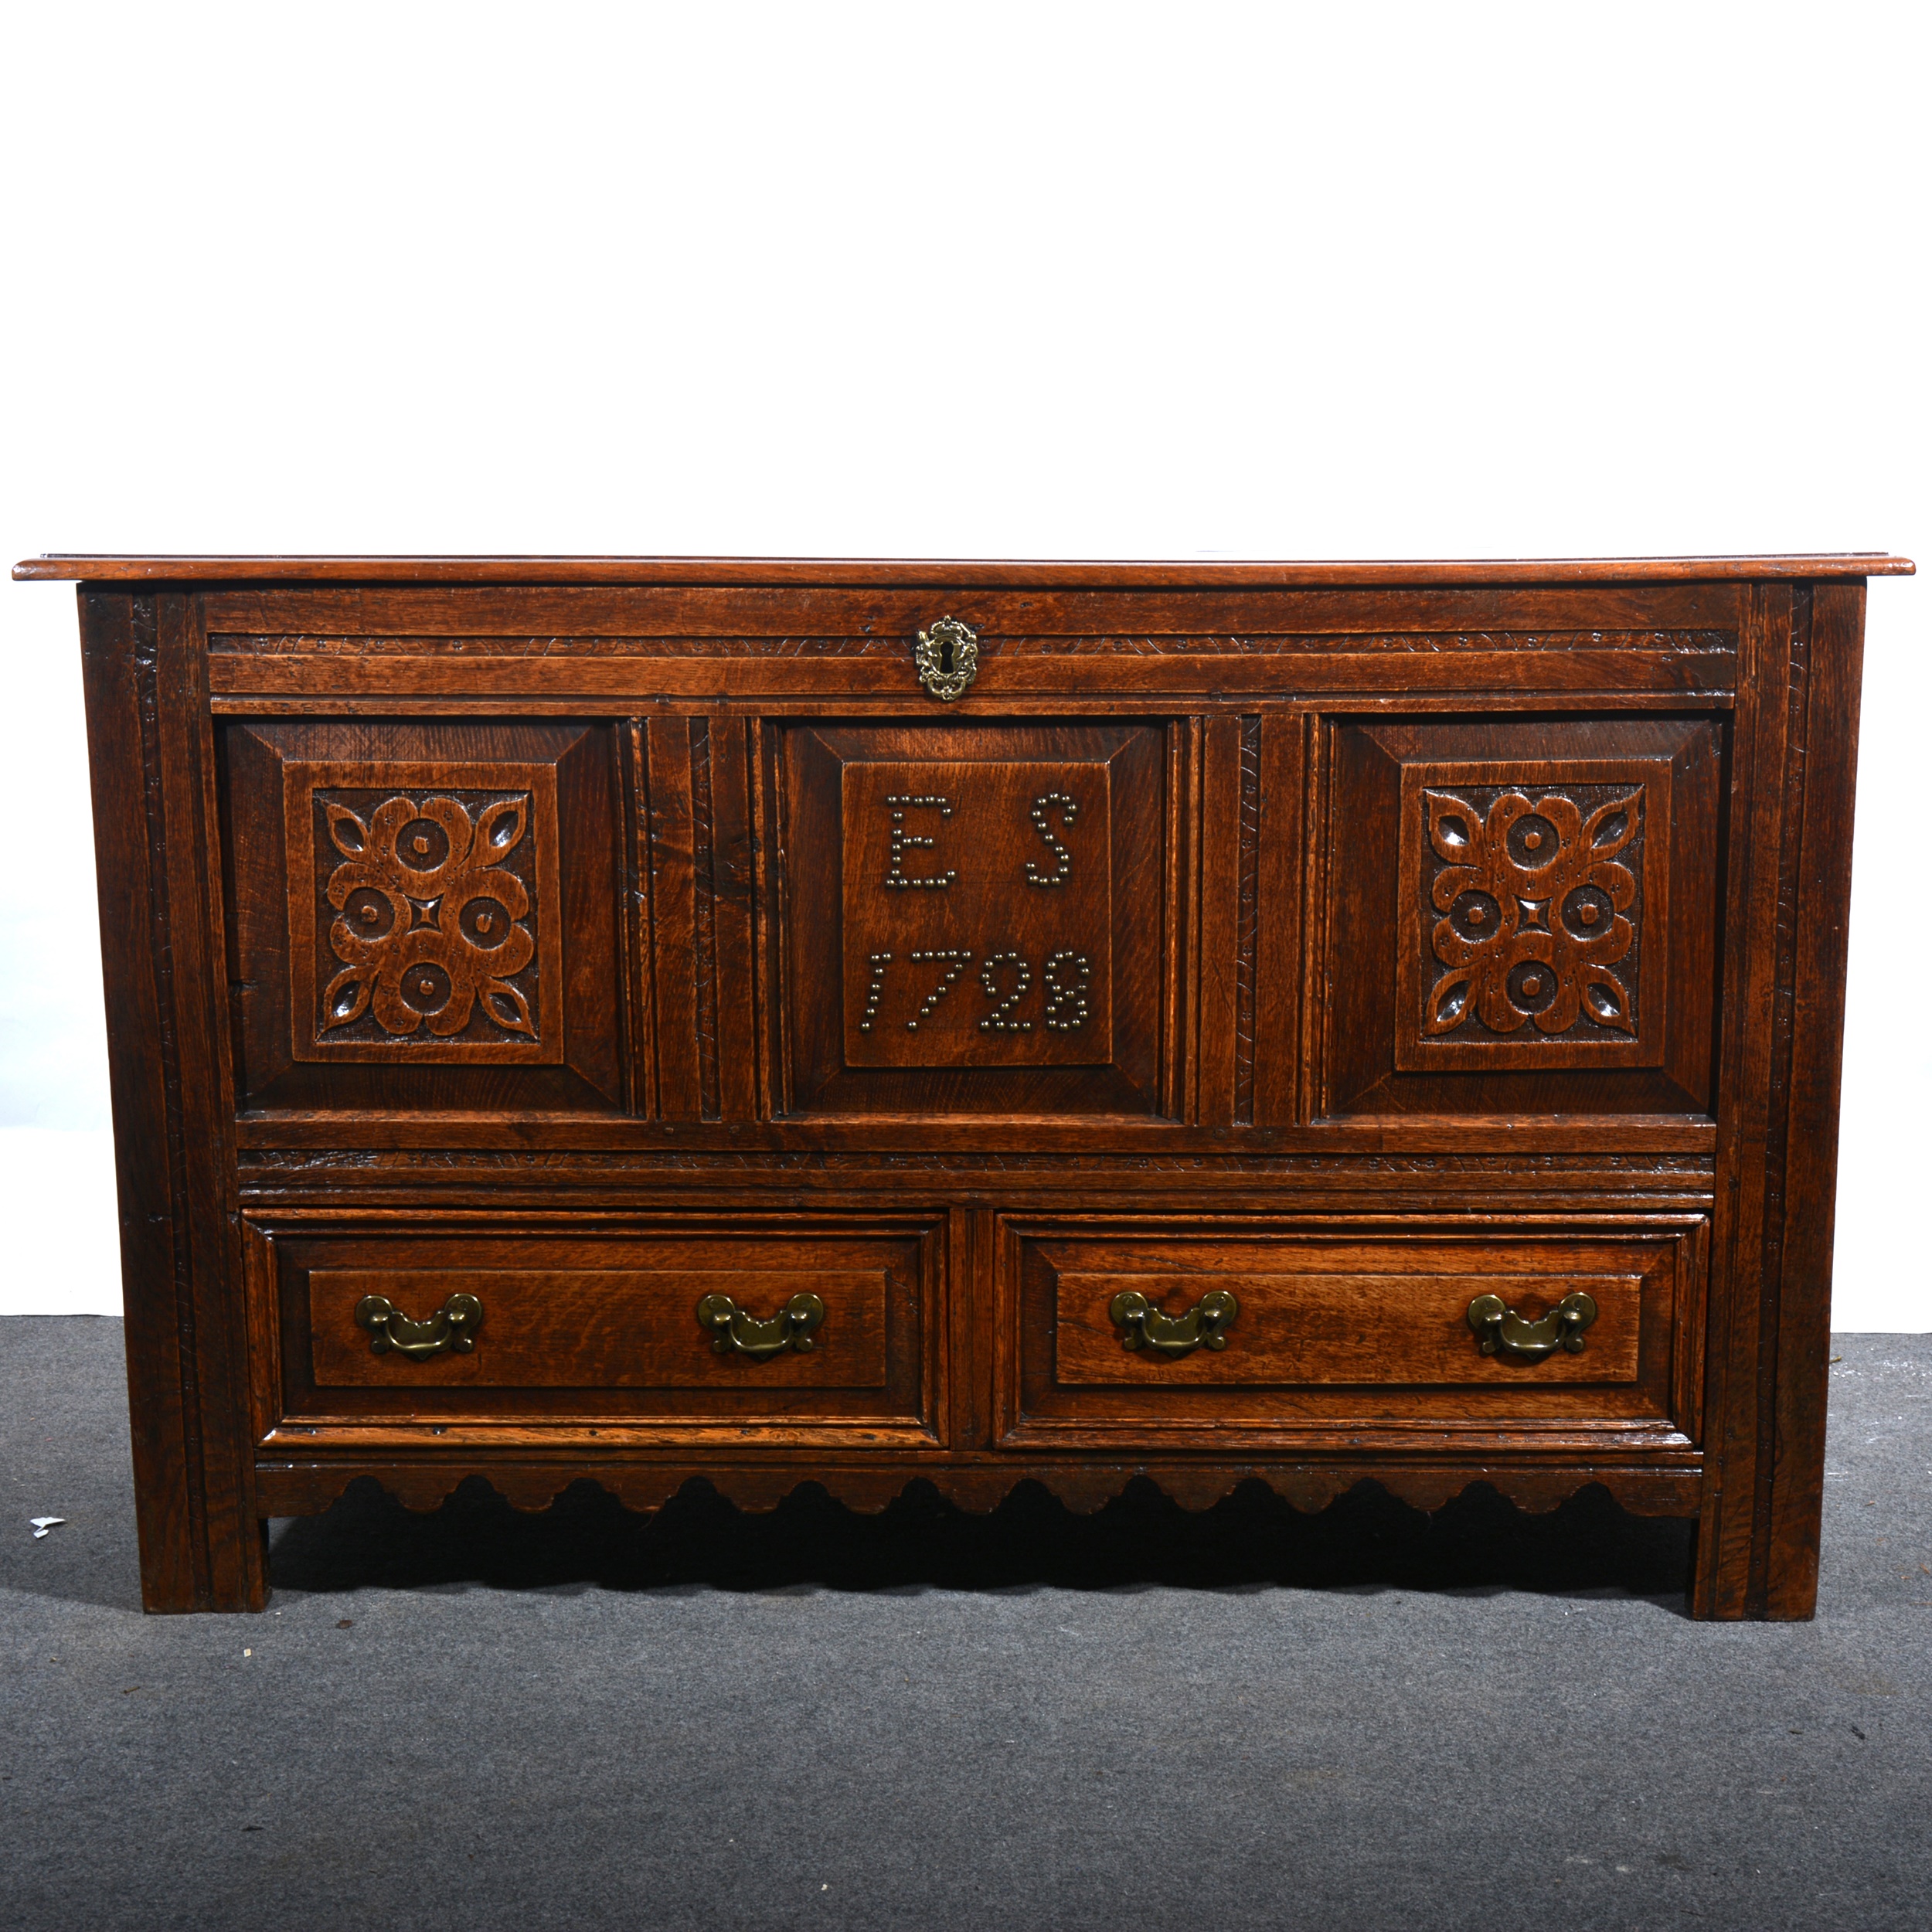 A joined oak mule chest, dated 1728.